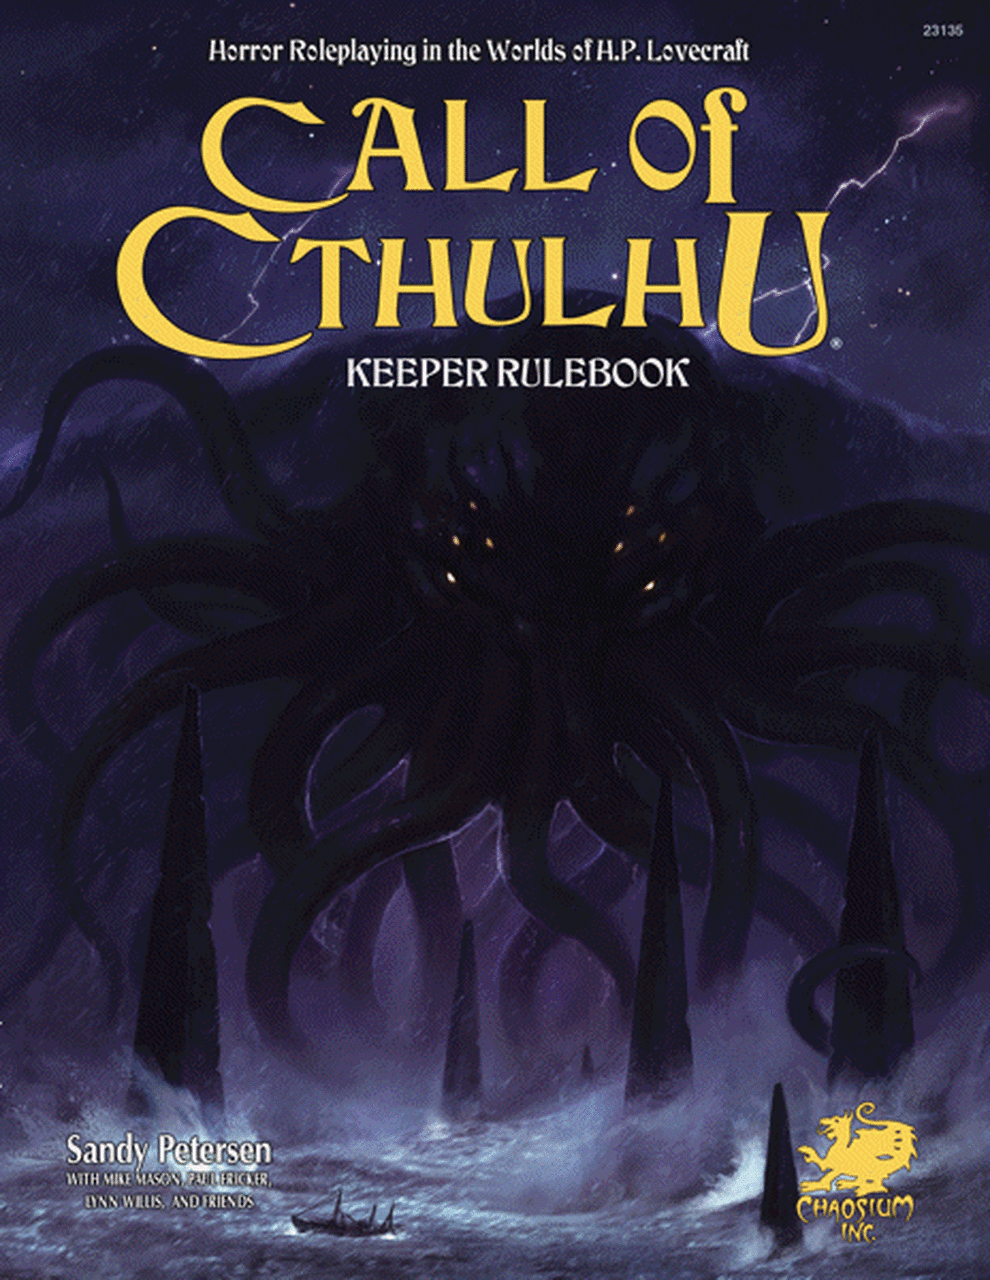 Call of Cthulhu - 7th Edition Keeper Rulebook